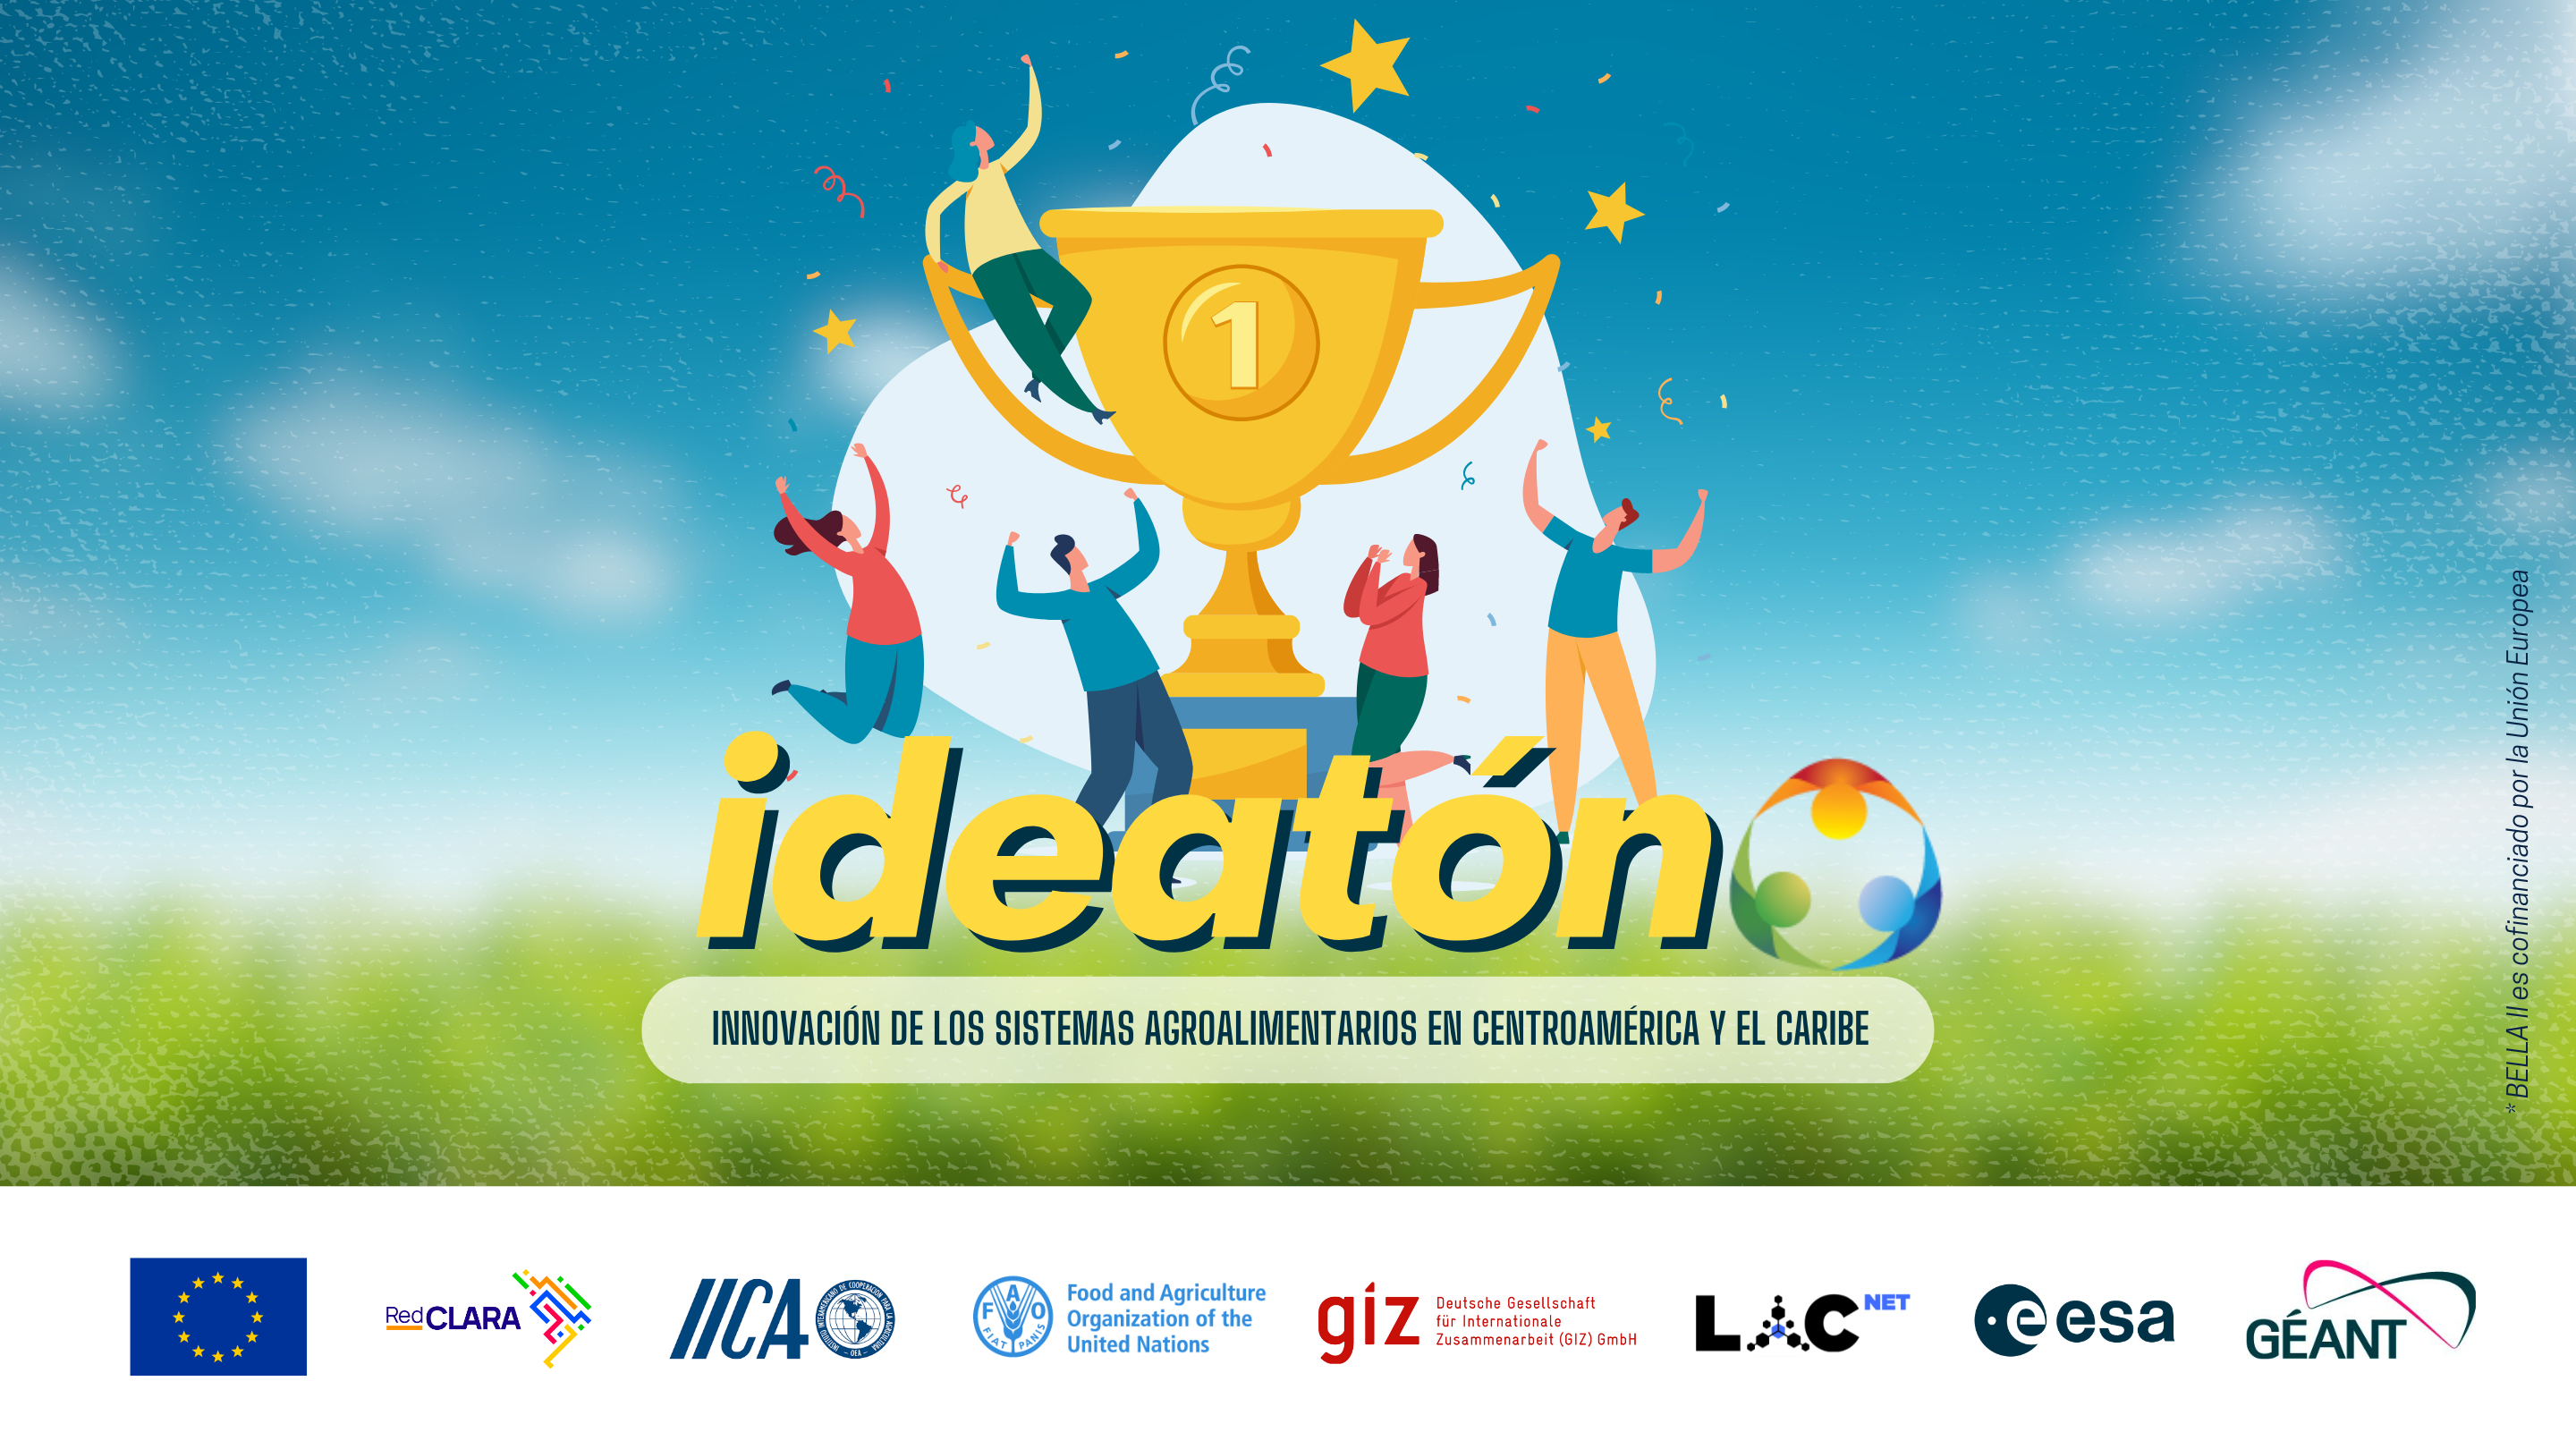 Discover the winning ideas of the BELLA II Ideathon on the Innovation of Agrifood Systems